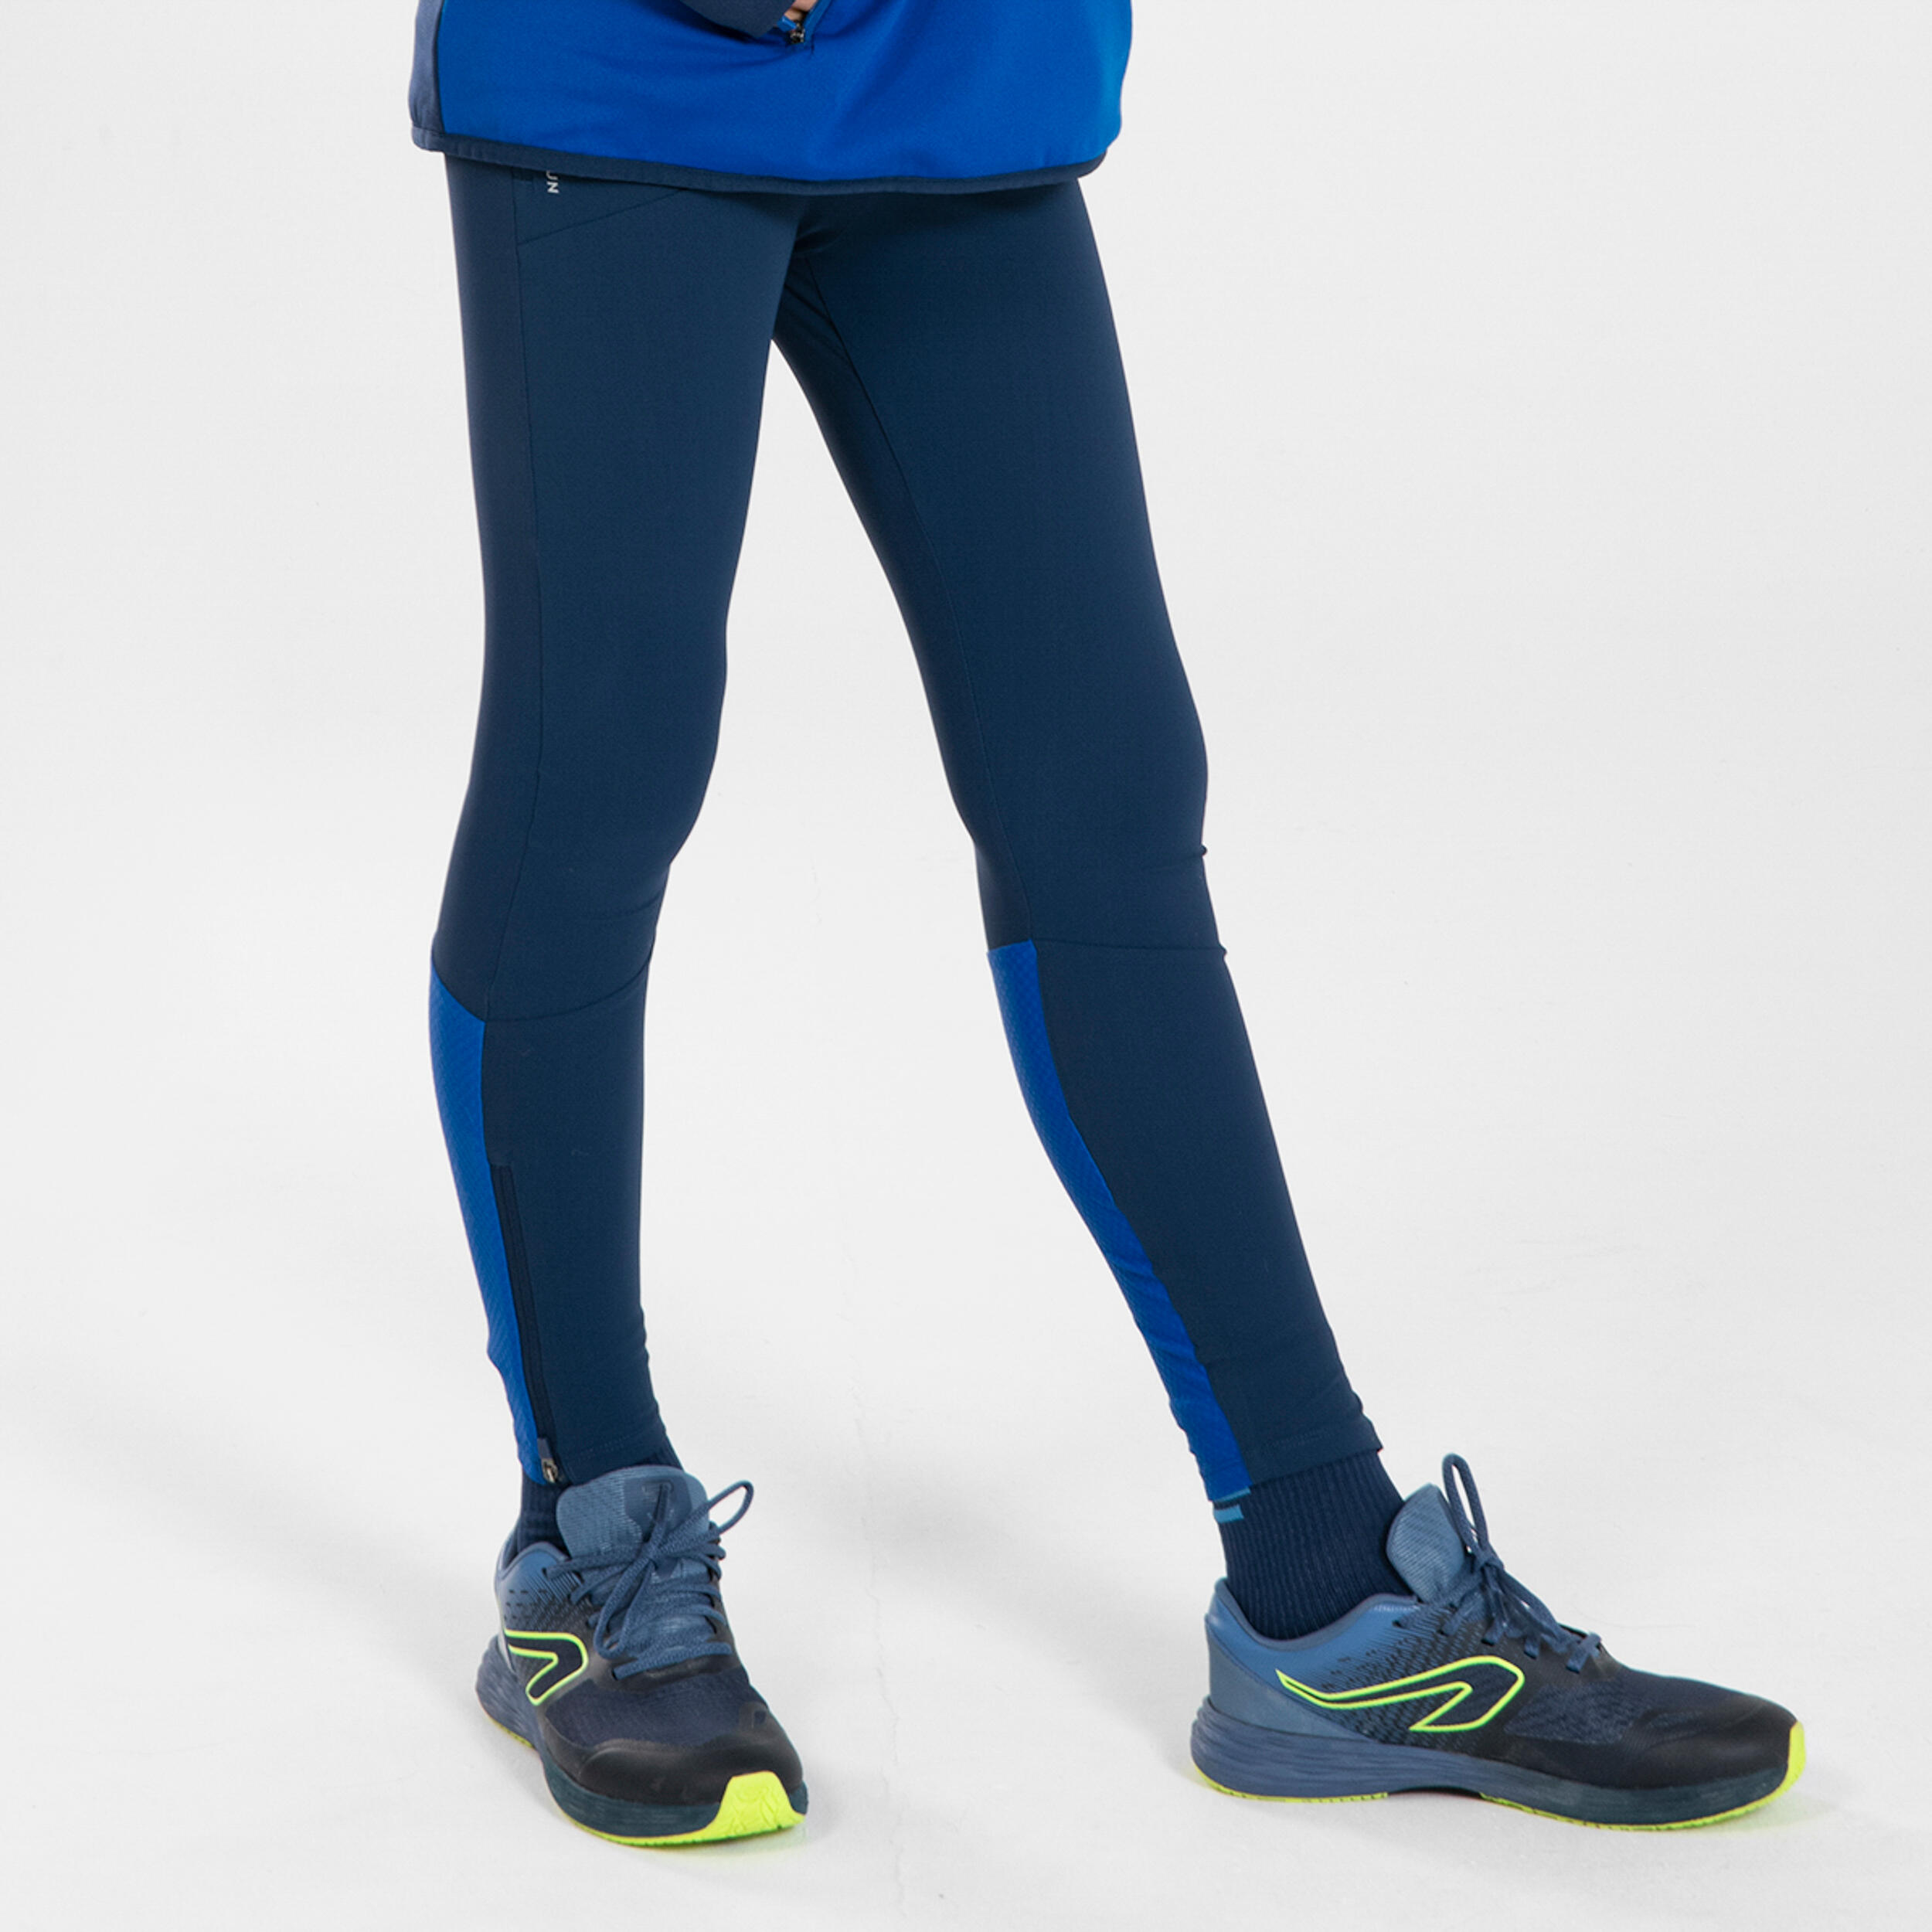 KIDS' RUNNING TIGHTS - KIPRUN DRY+ NAVY BLUE AND ELECTRIC BLUE 10/13